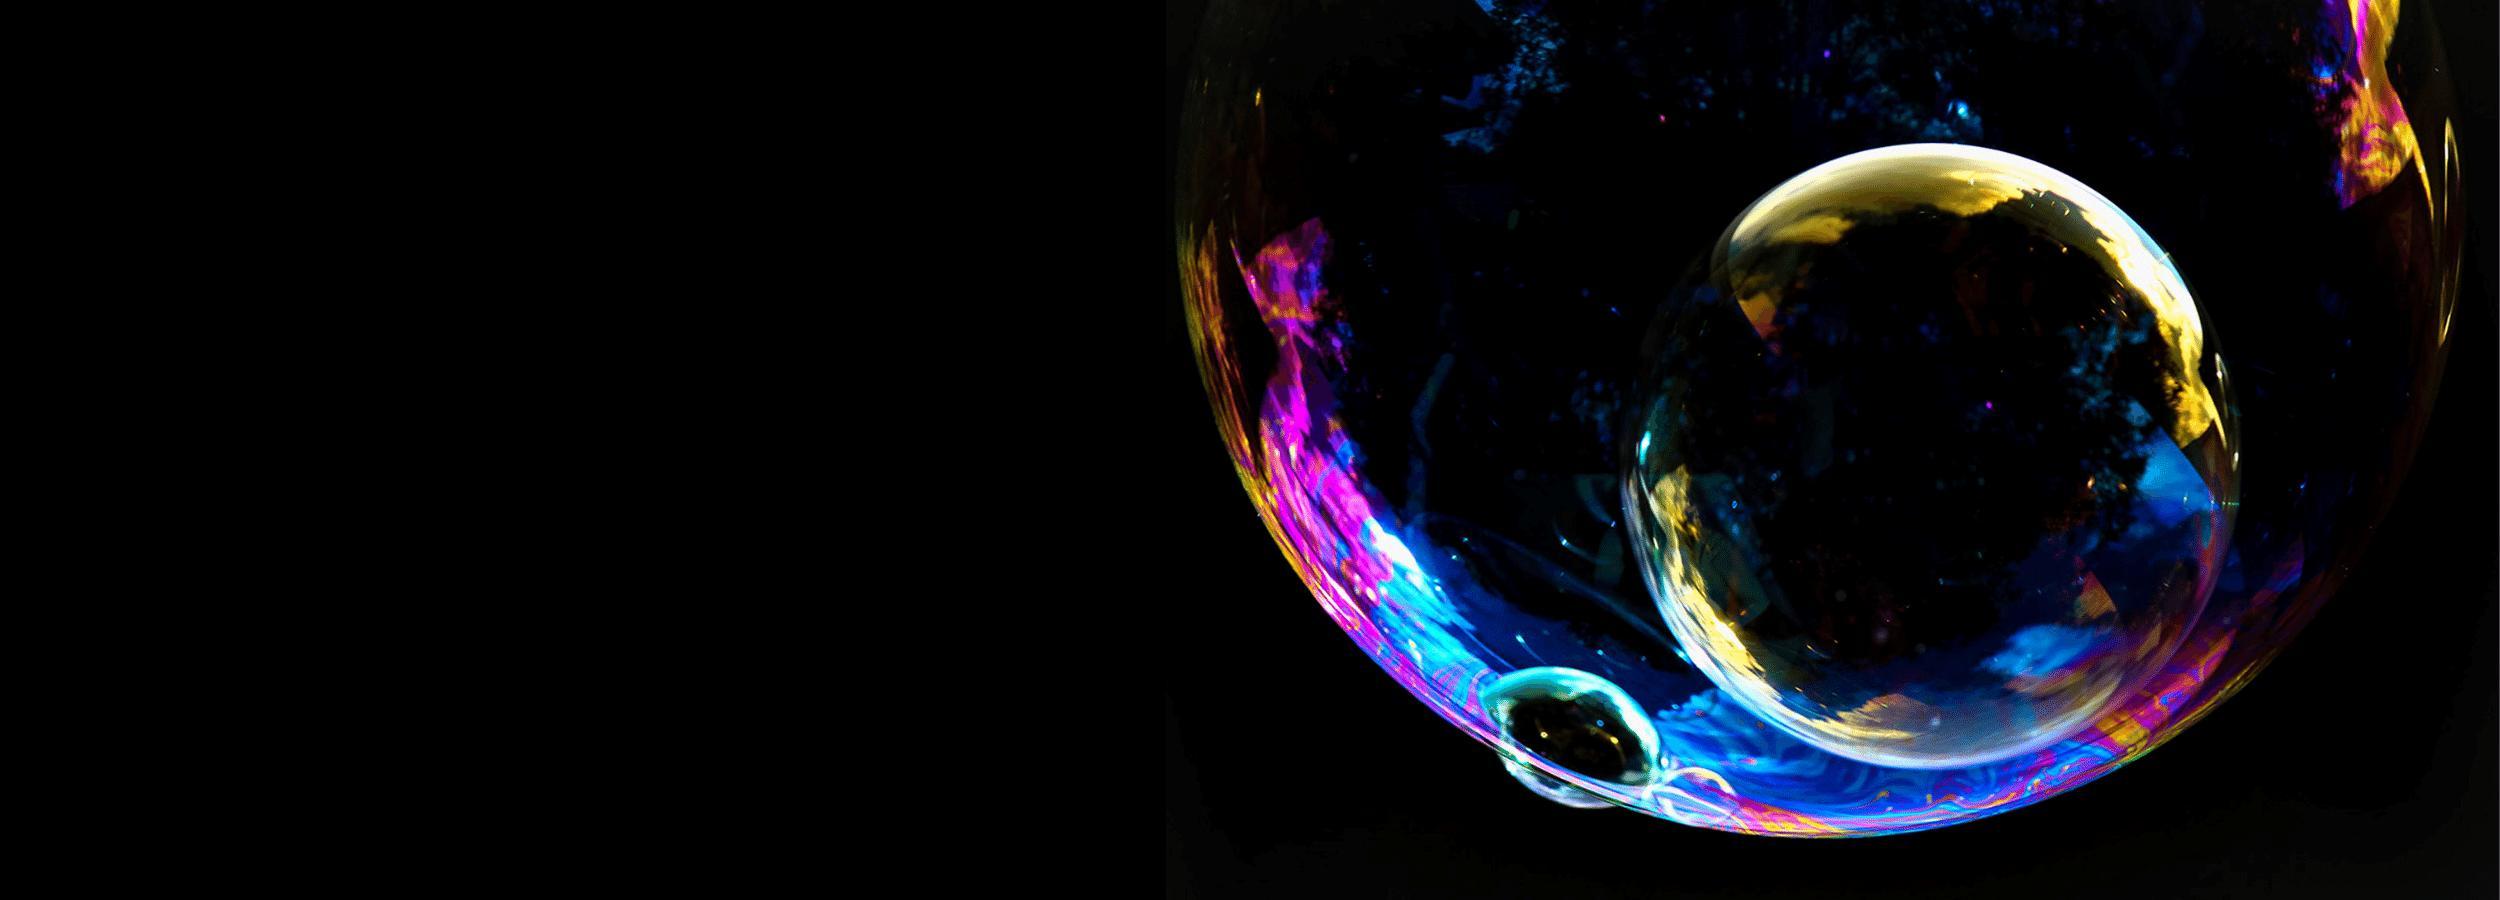 Bubble visualisation for psychic protection